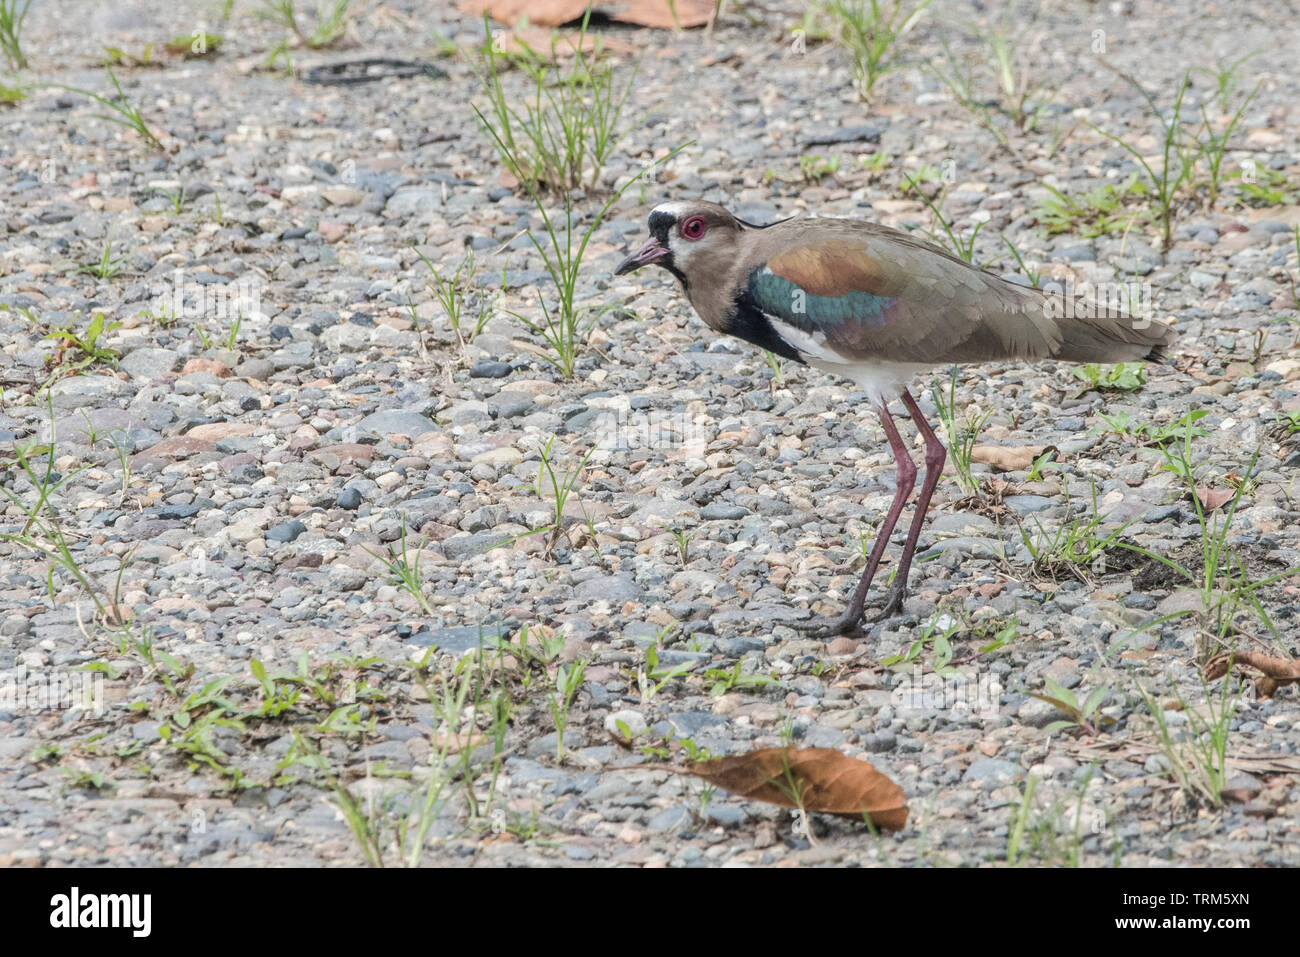 A southern lapwing (Vanellus chilensis) from Yasuni national park in the Ecuadorian Amazon. Stock Photo